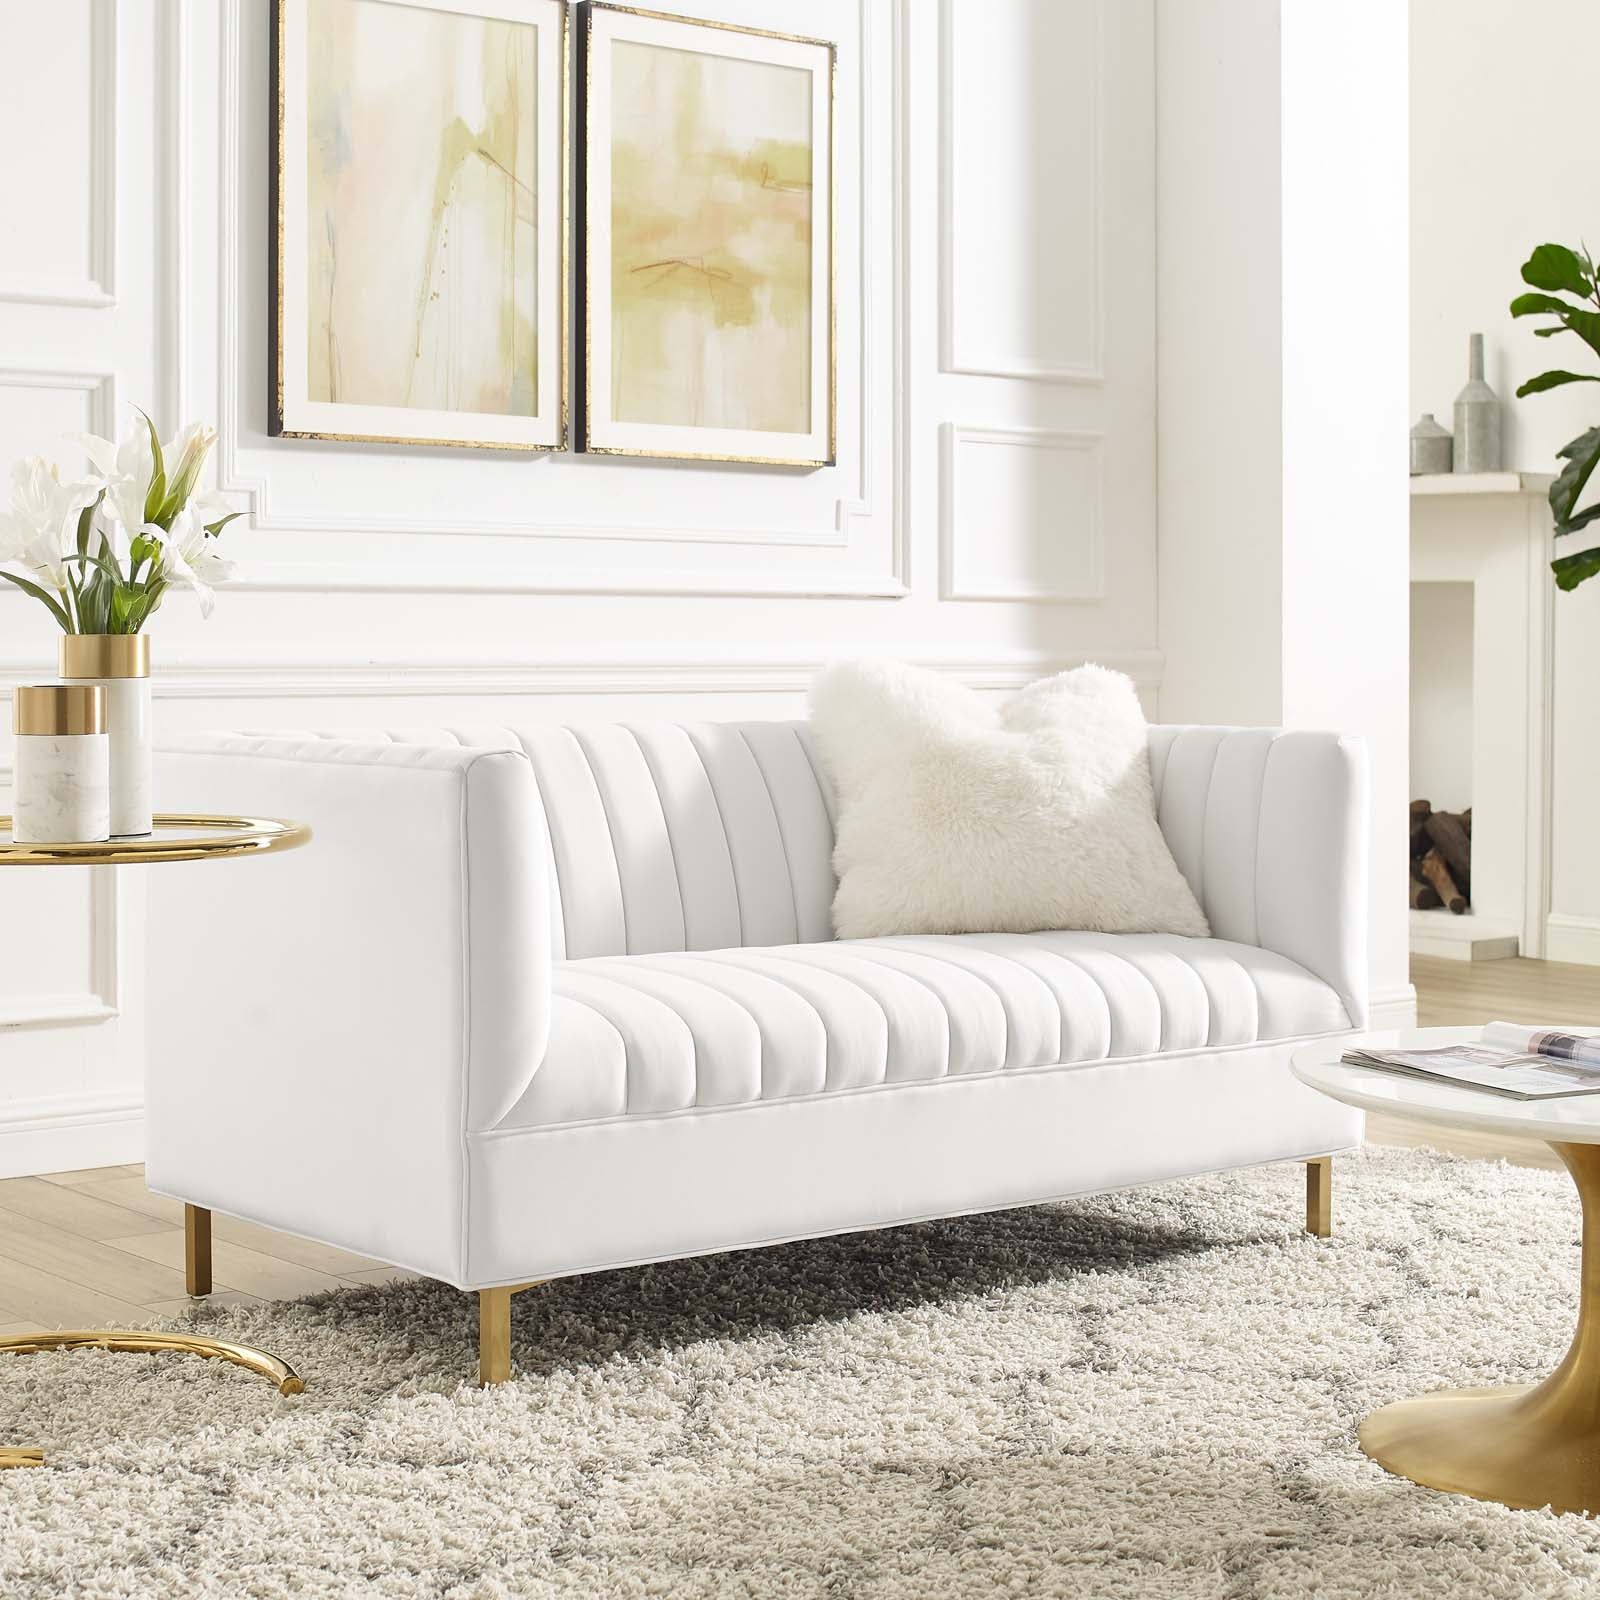 How to select white tufted loveseat
  furniture